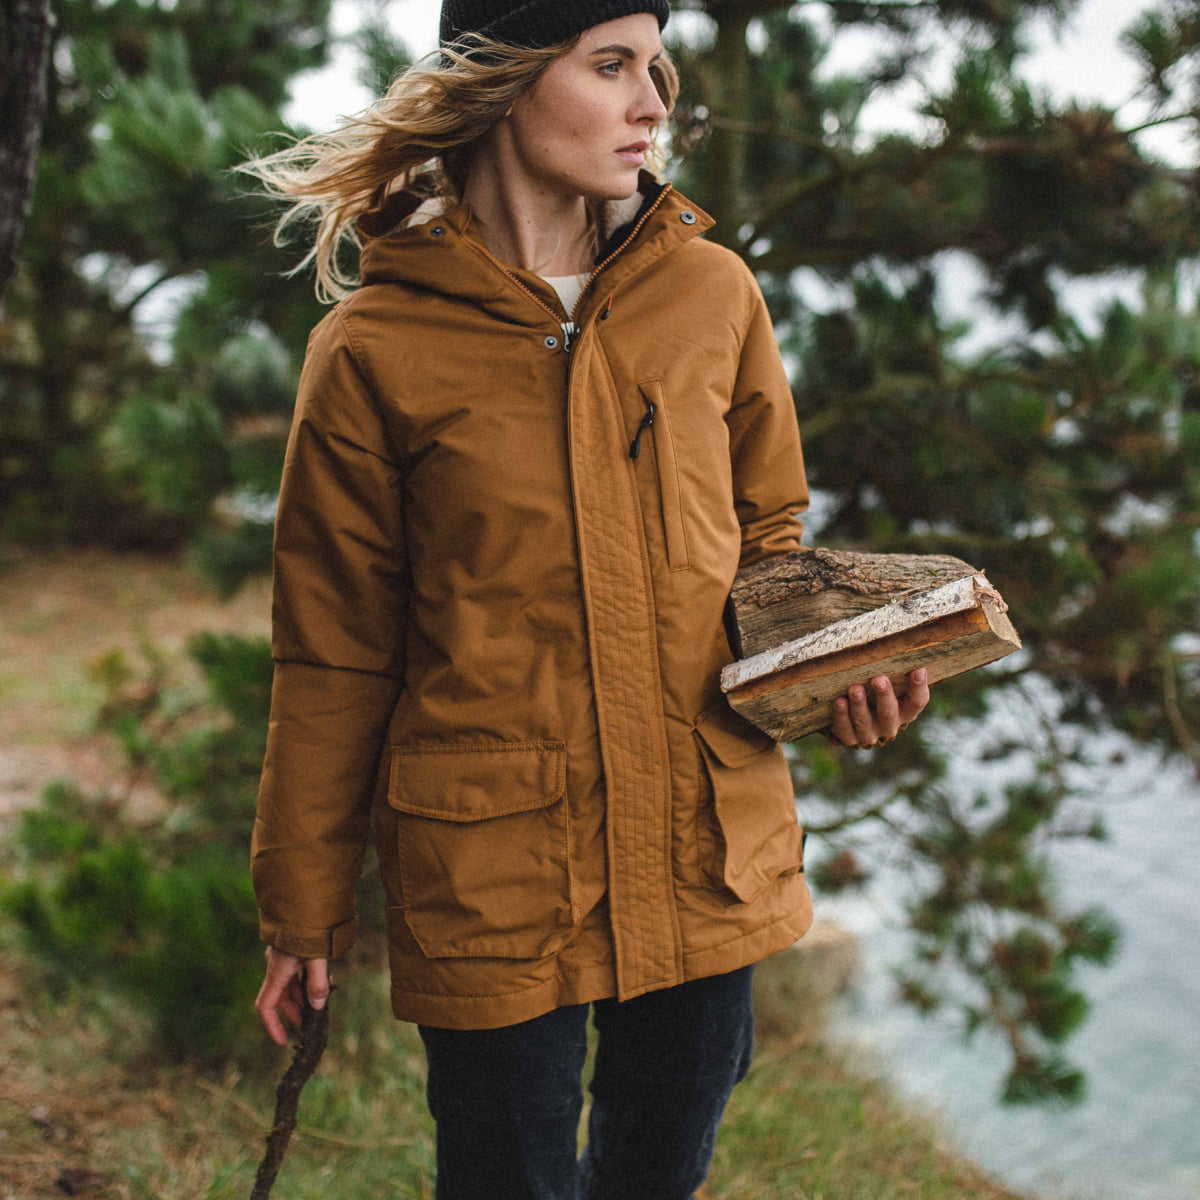 Stay warm and stylish with the Women's Patagonia Back Pasture Jacket